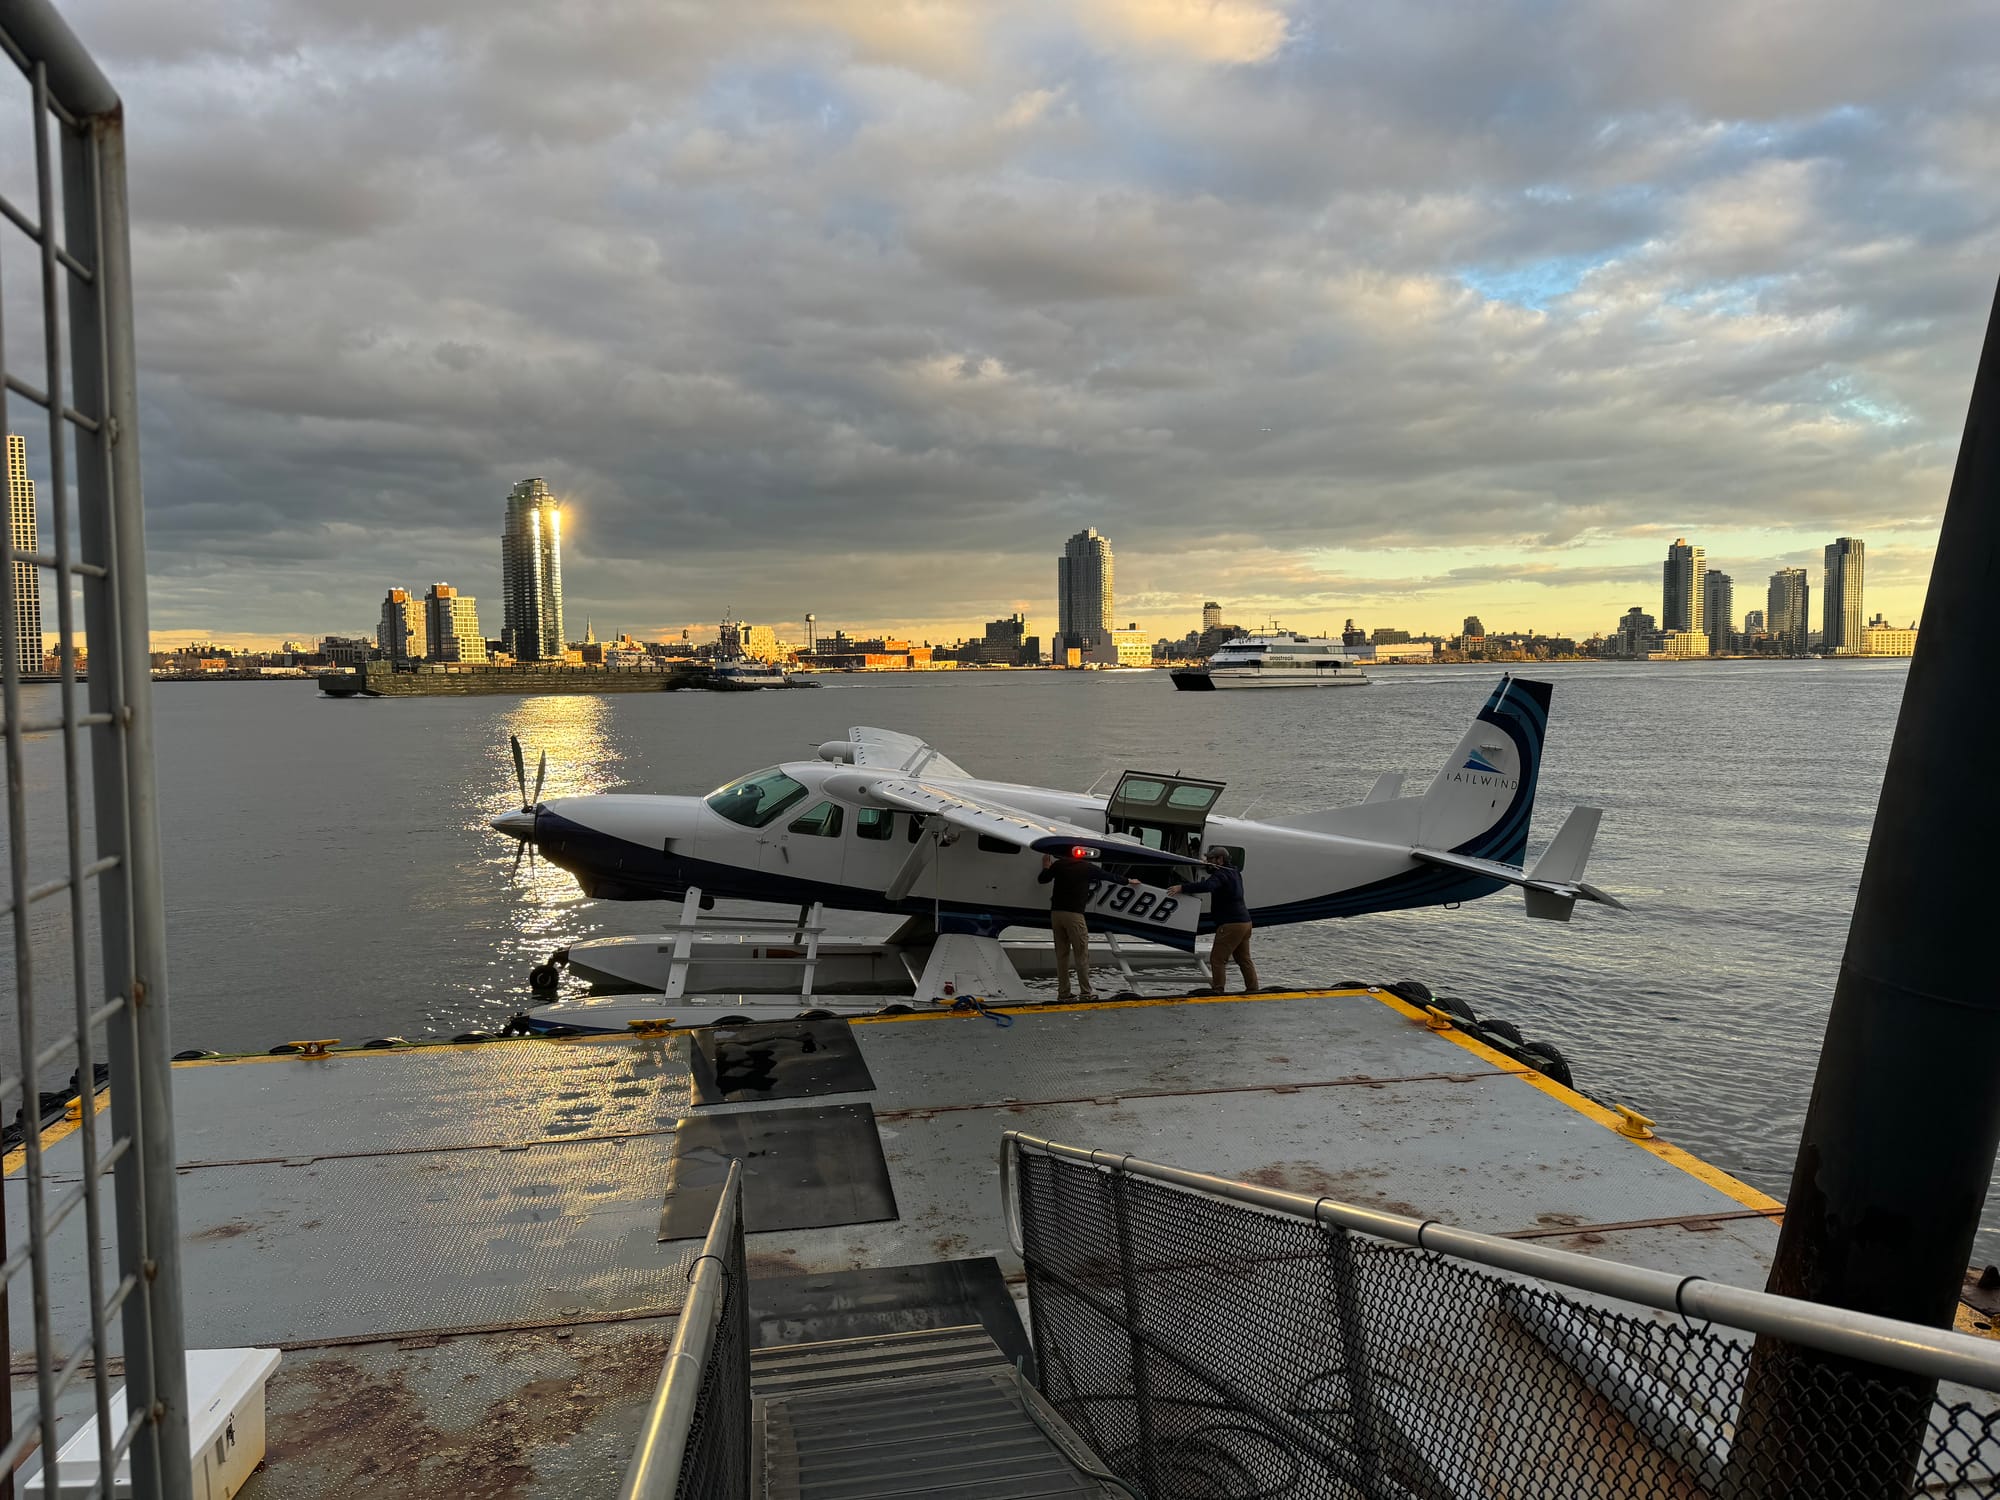                      Flight Review: Tailwind Air Seaplane From New York to Boston(ish)                             
                     